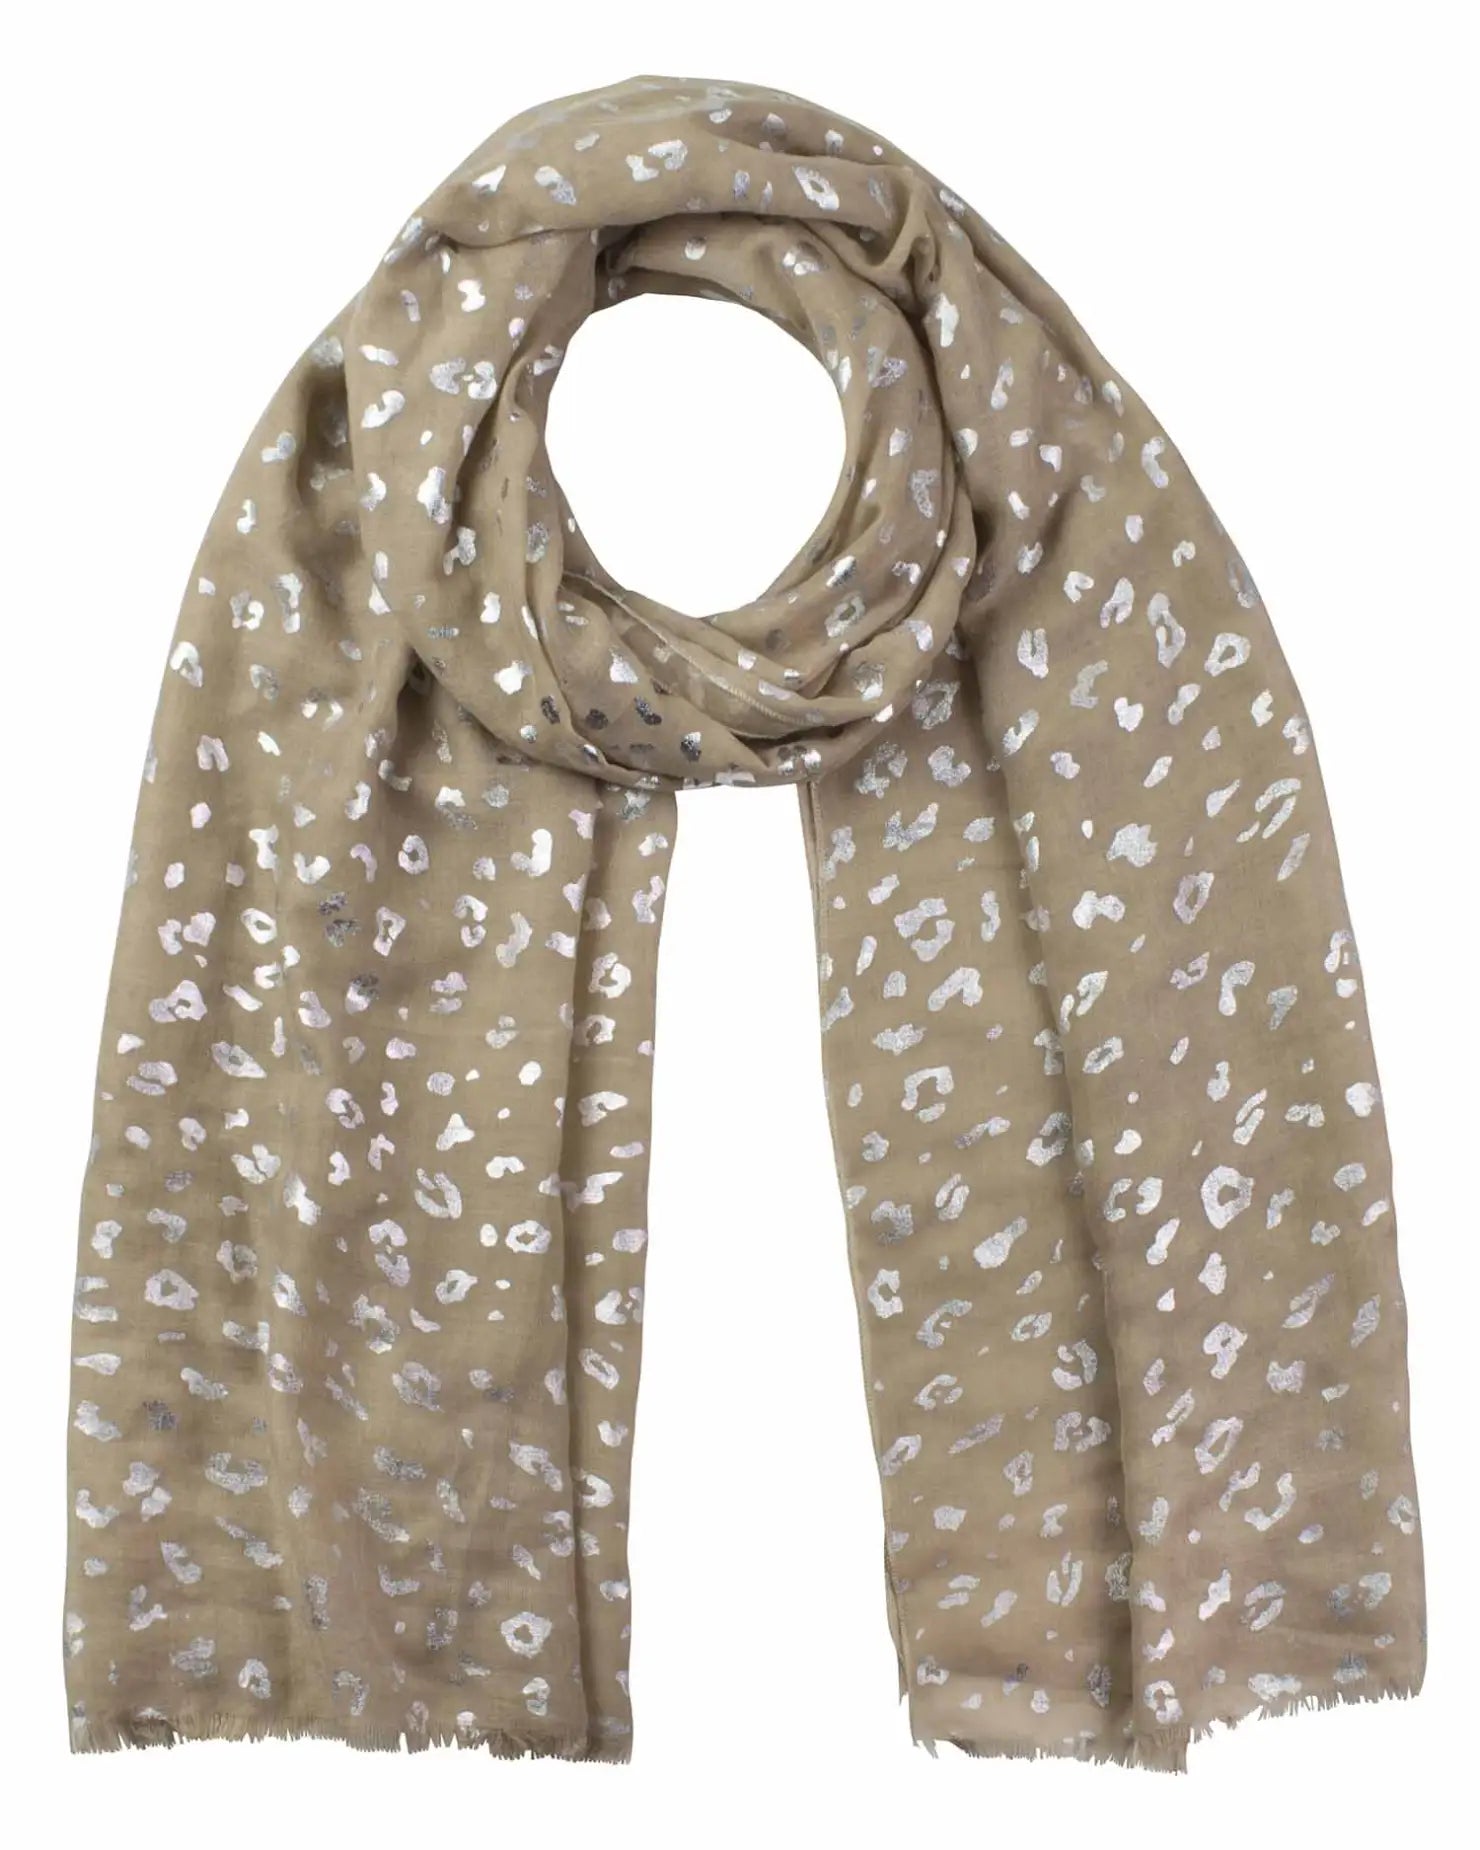 Beige scarf with white spots from Silver Foil Leopard Print Large Scarf.